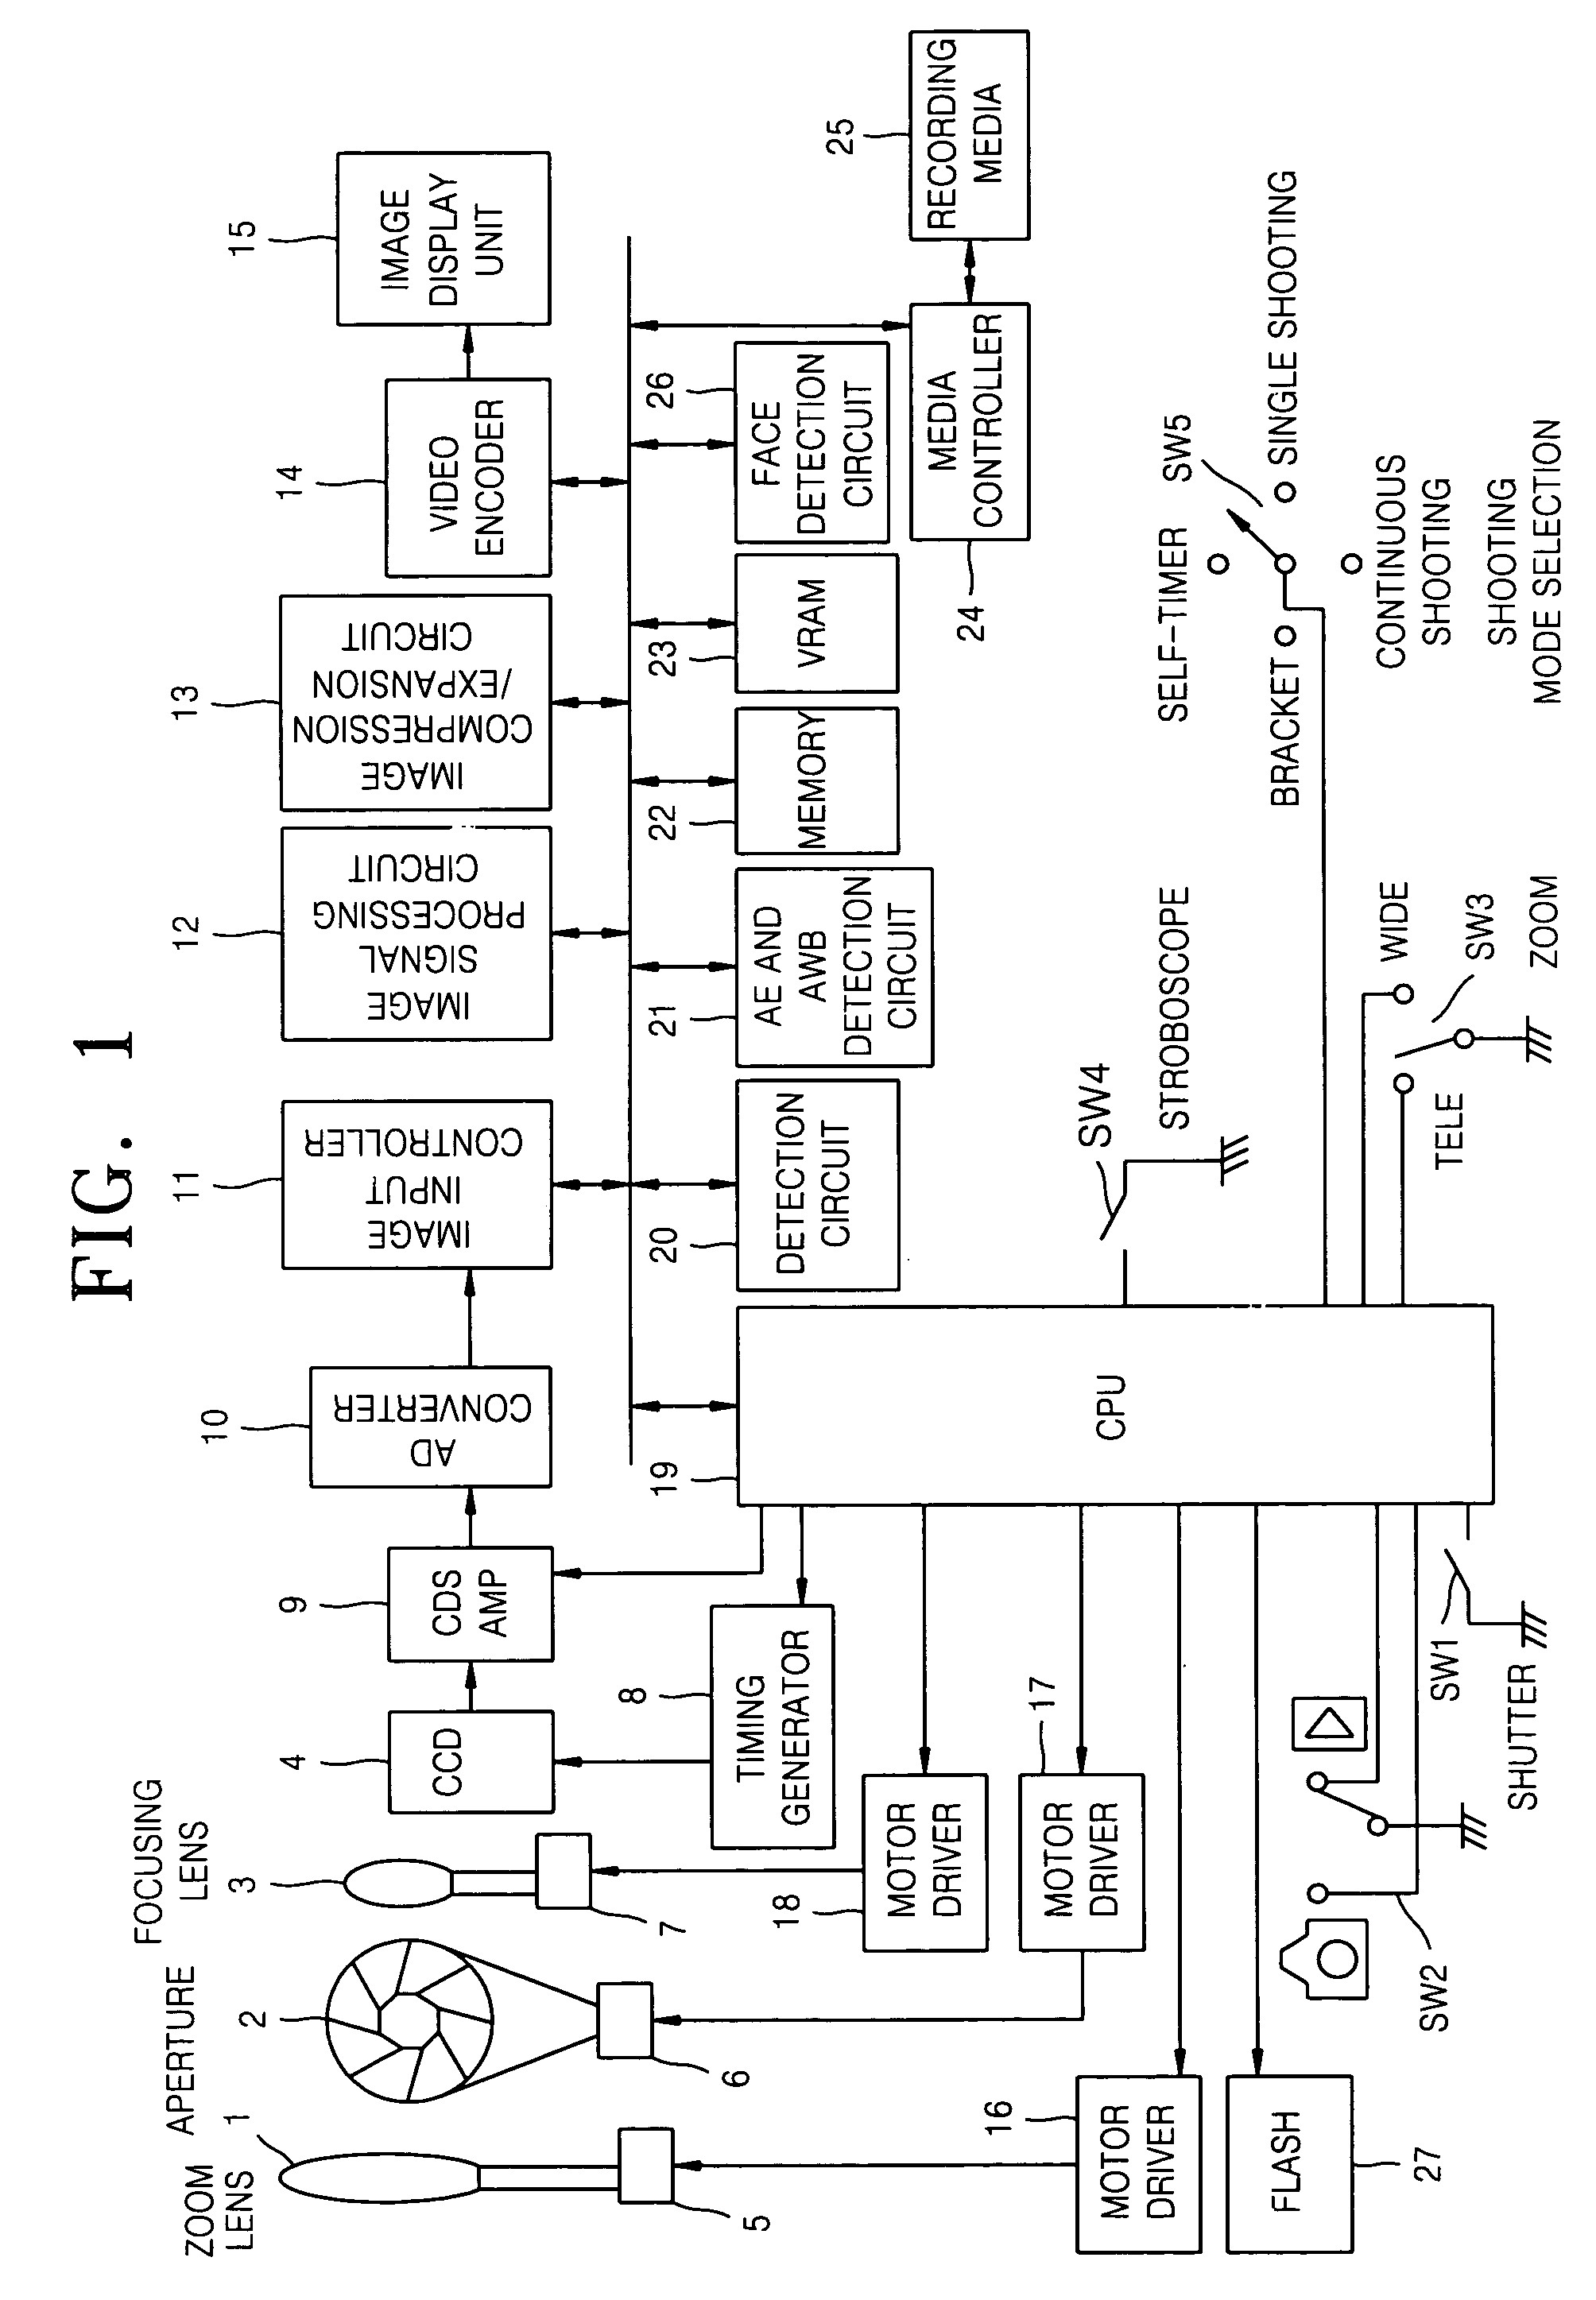 Digital camera with face detection function for facilitating exposure compensation